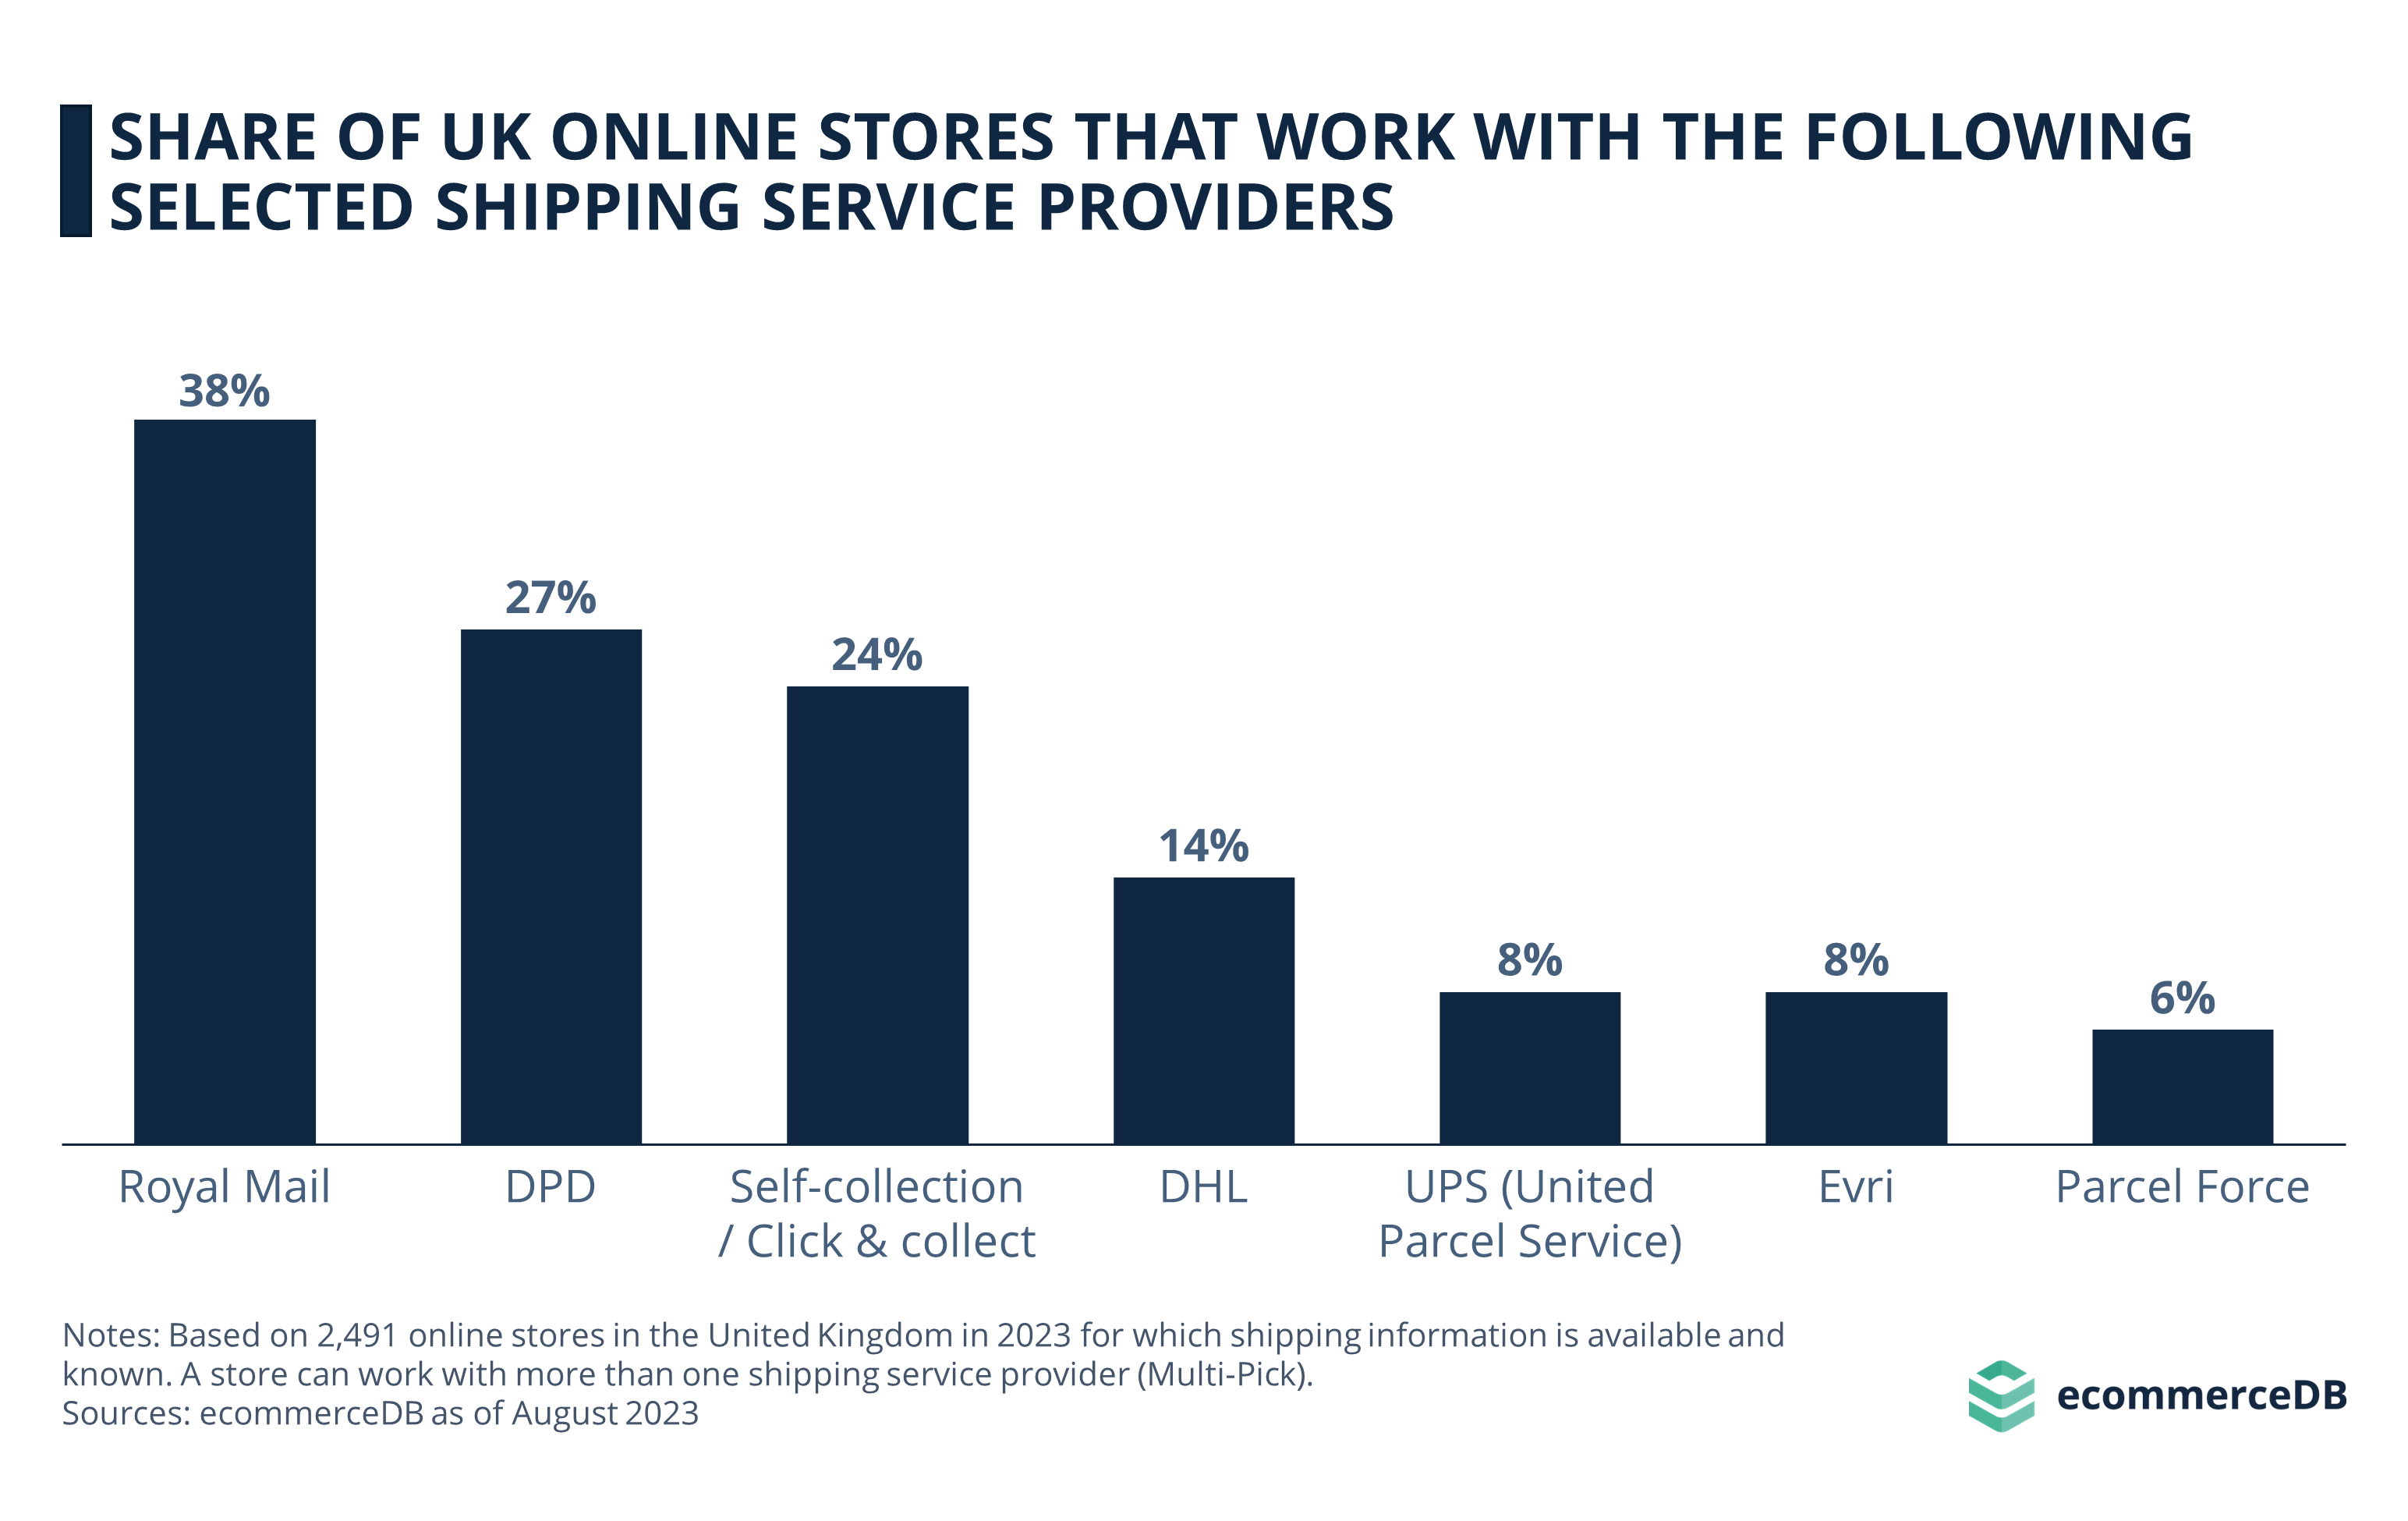 Top 7 Shipping Service Providers of UK Online Stores in 2023